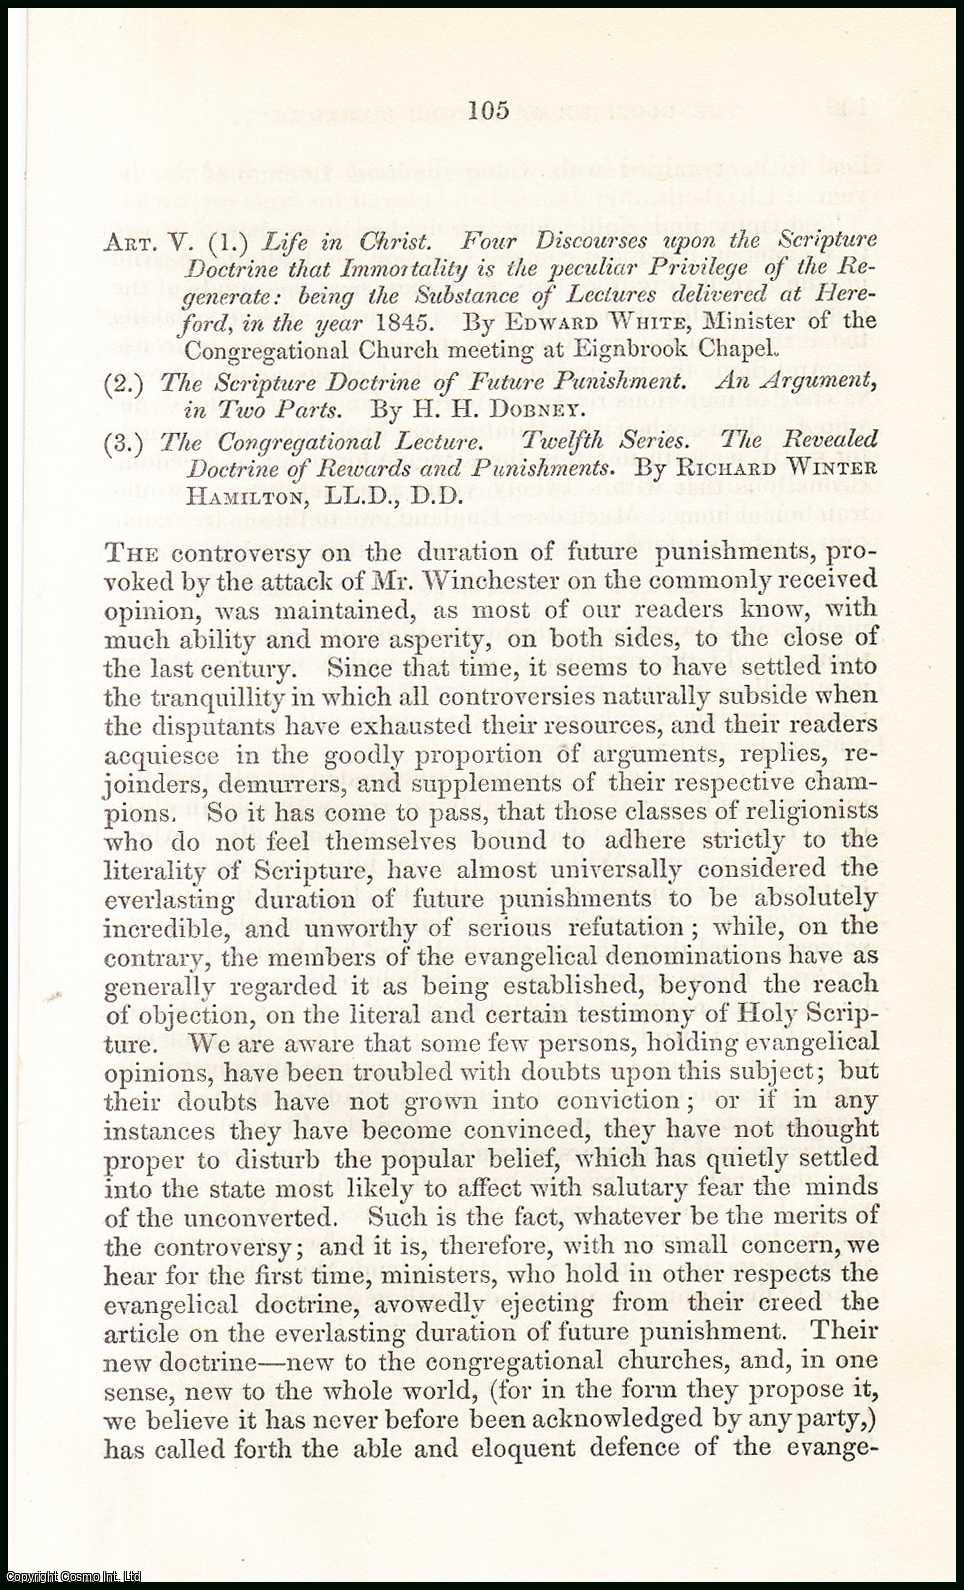 Author Unknown - The Doctrine of Future Punishment. A rare original article from the British Quarterly Review, 1848.